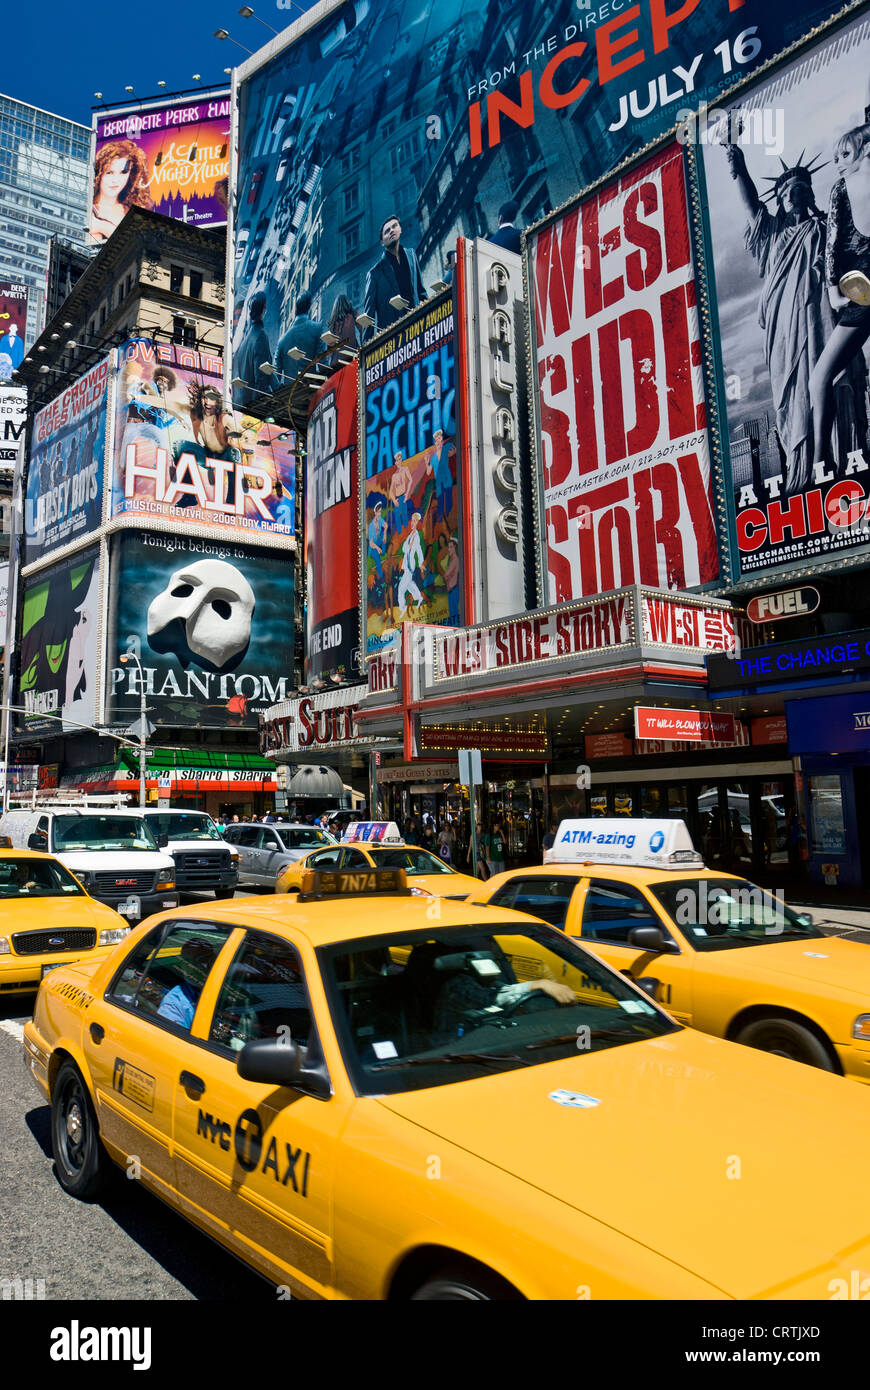 Times Square New York Yellow Taxi, New York City Daytime Broadway Theater Billboards and Yellow Taxis Stock Photo